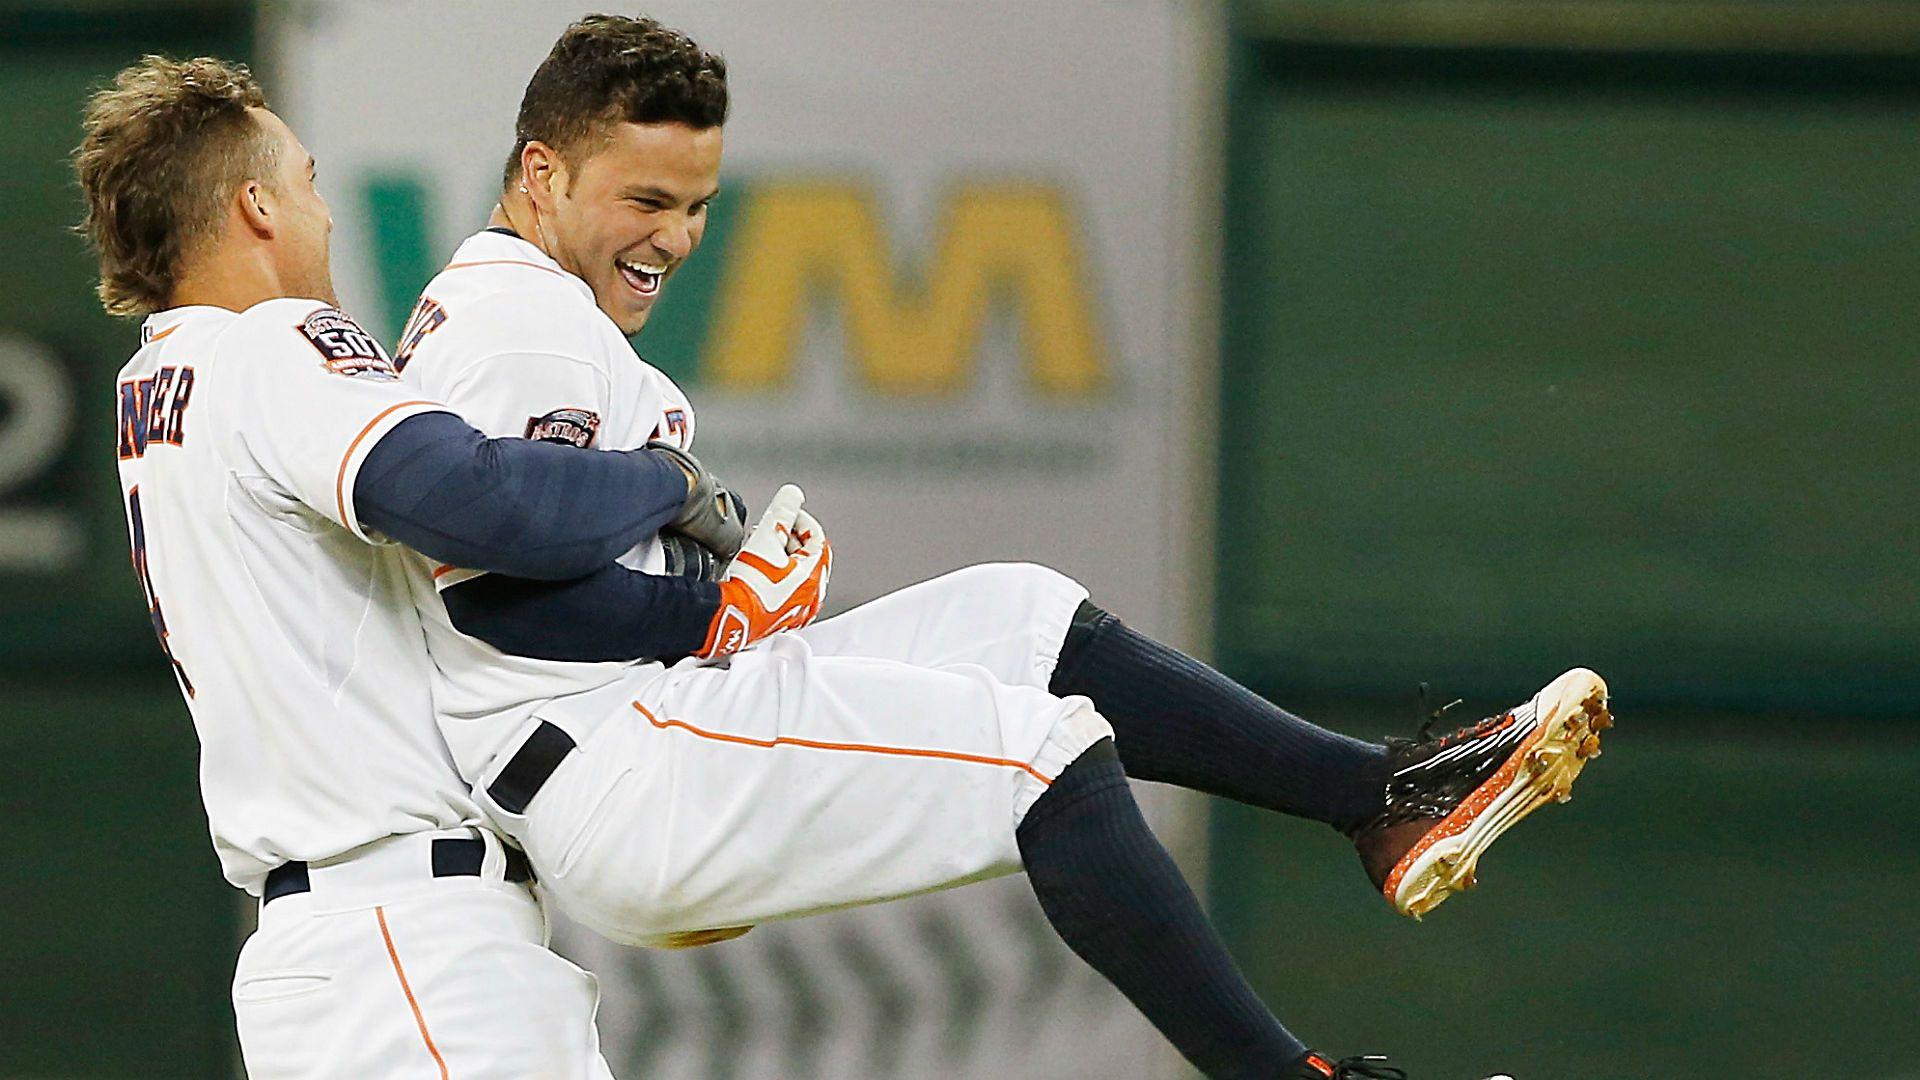 MLB Nightly 9: Astros win in walkoff fashion; Reds' Leake dominant